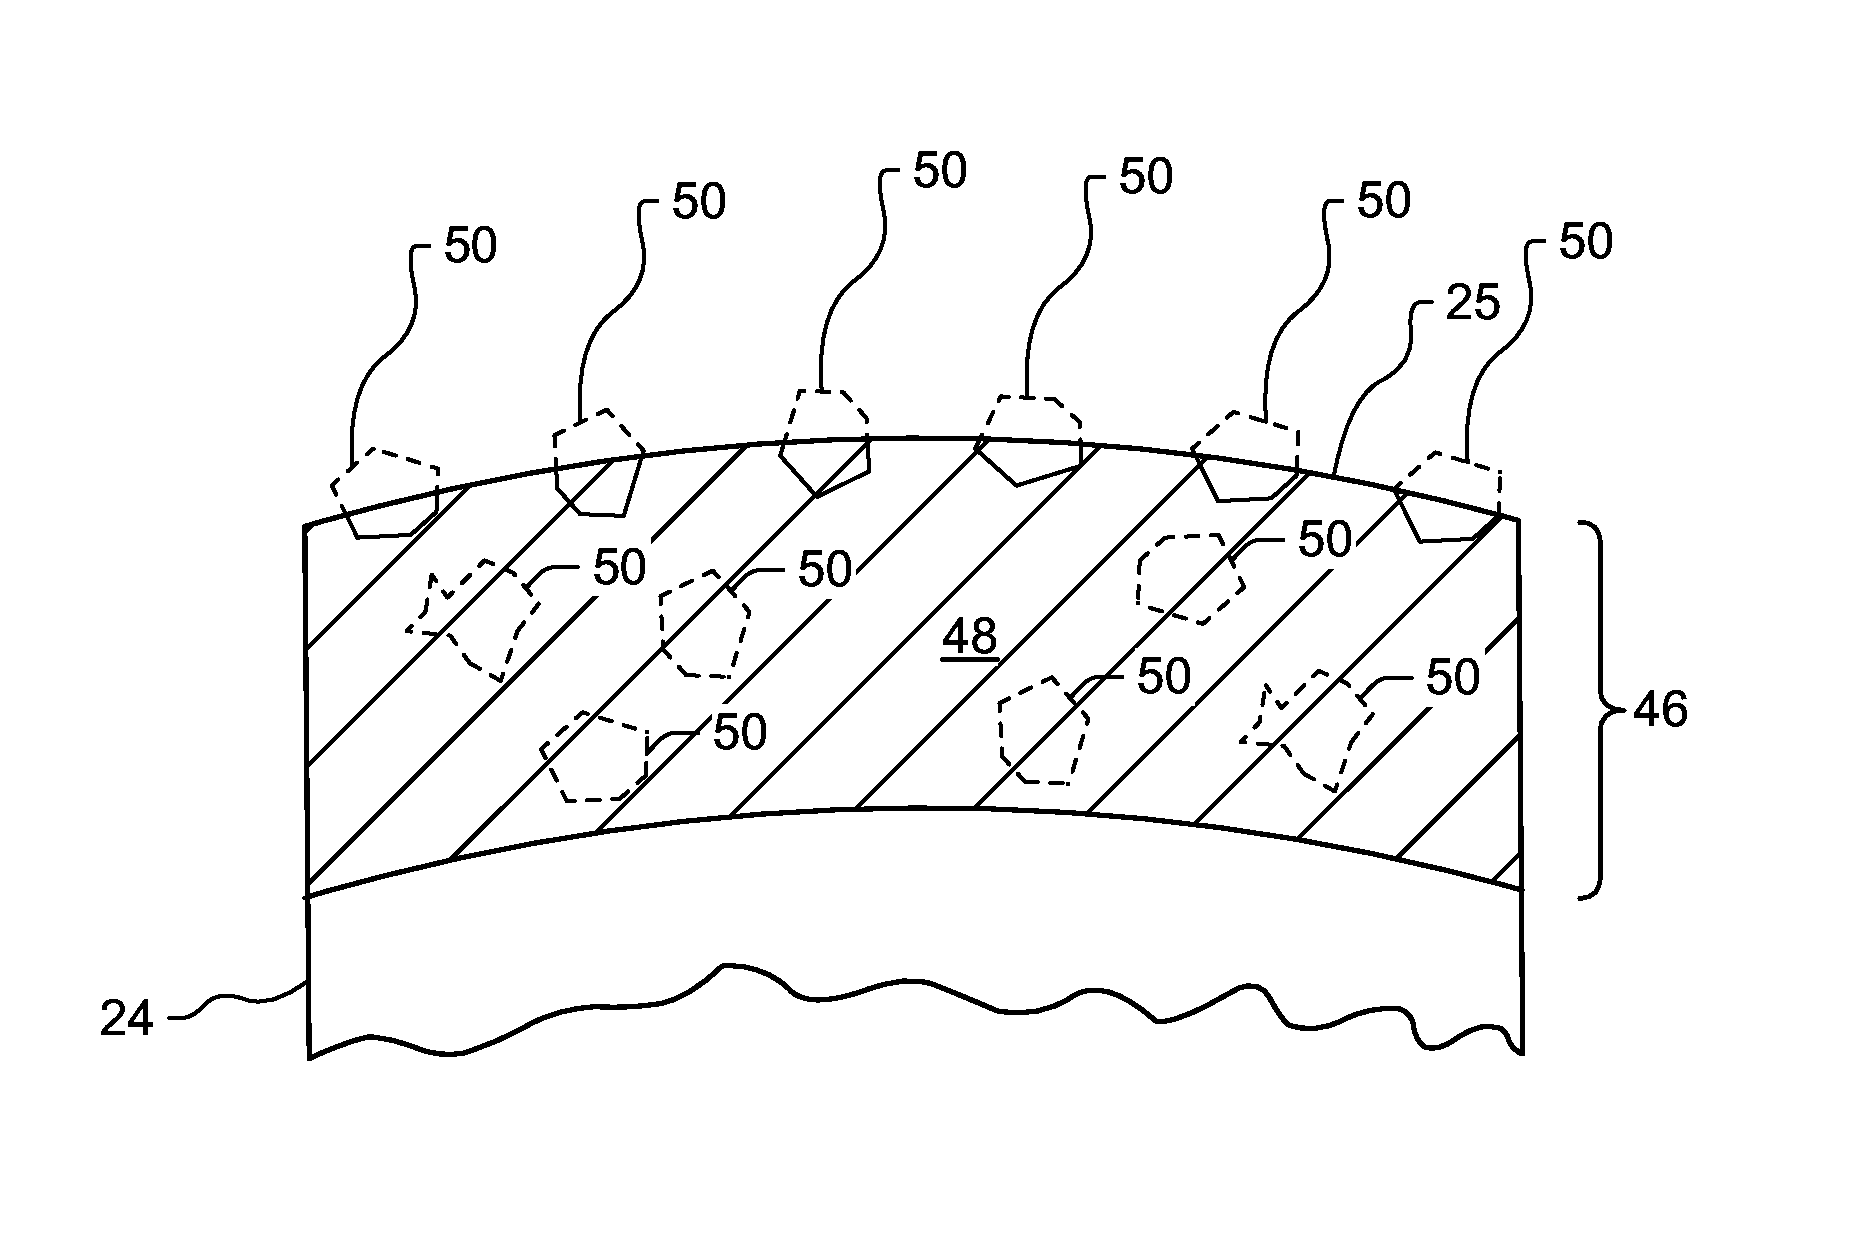 Method of forming an abrasive coating on a fan blade tip